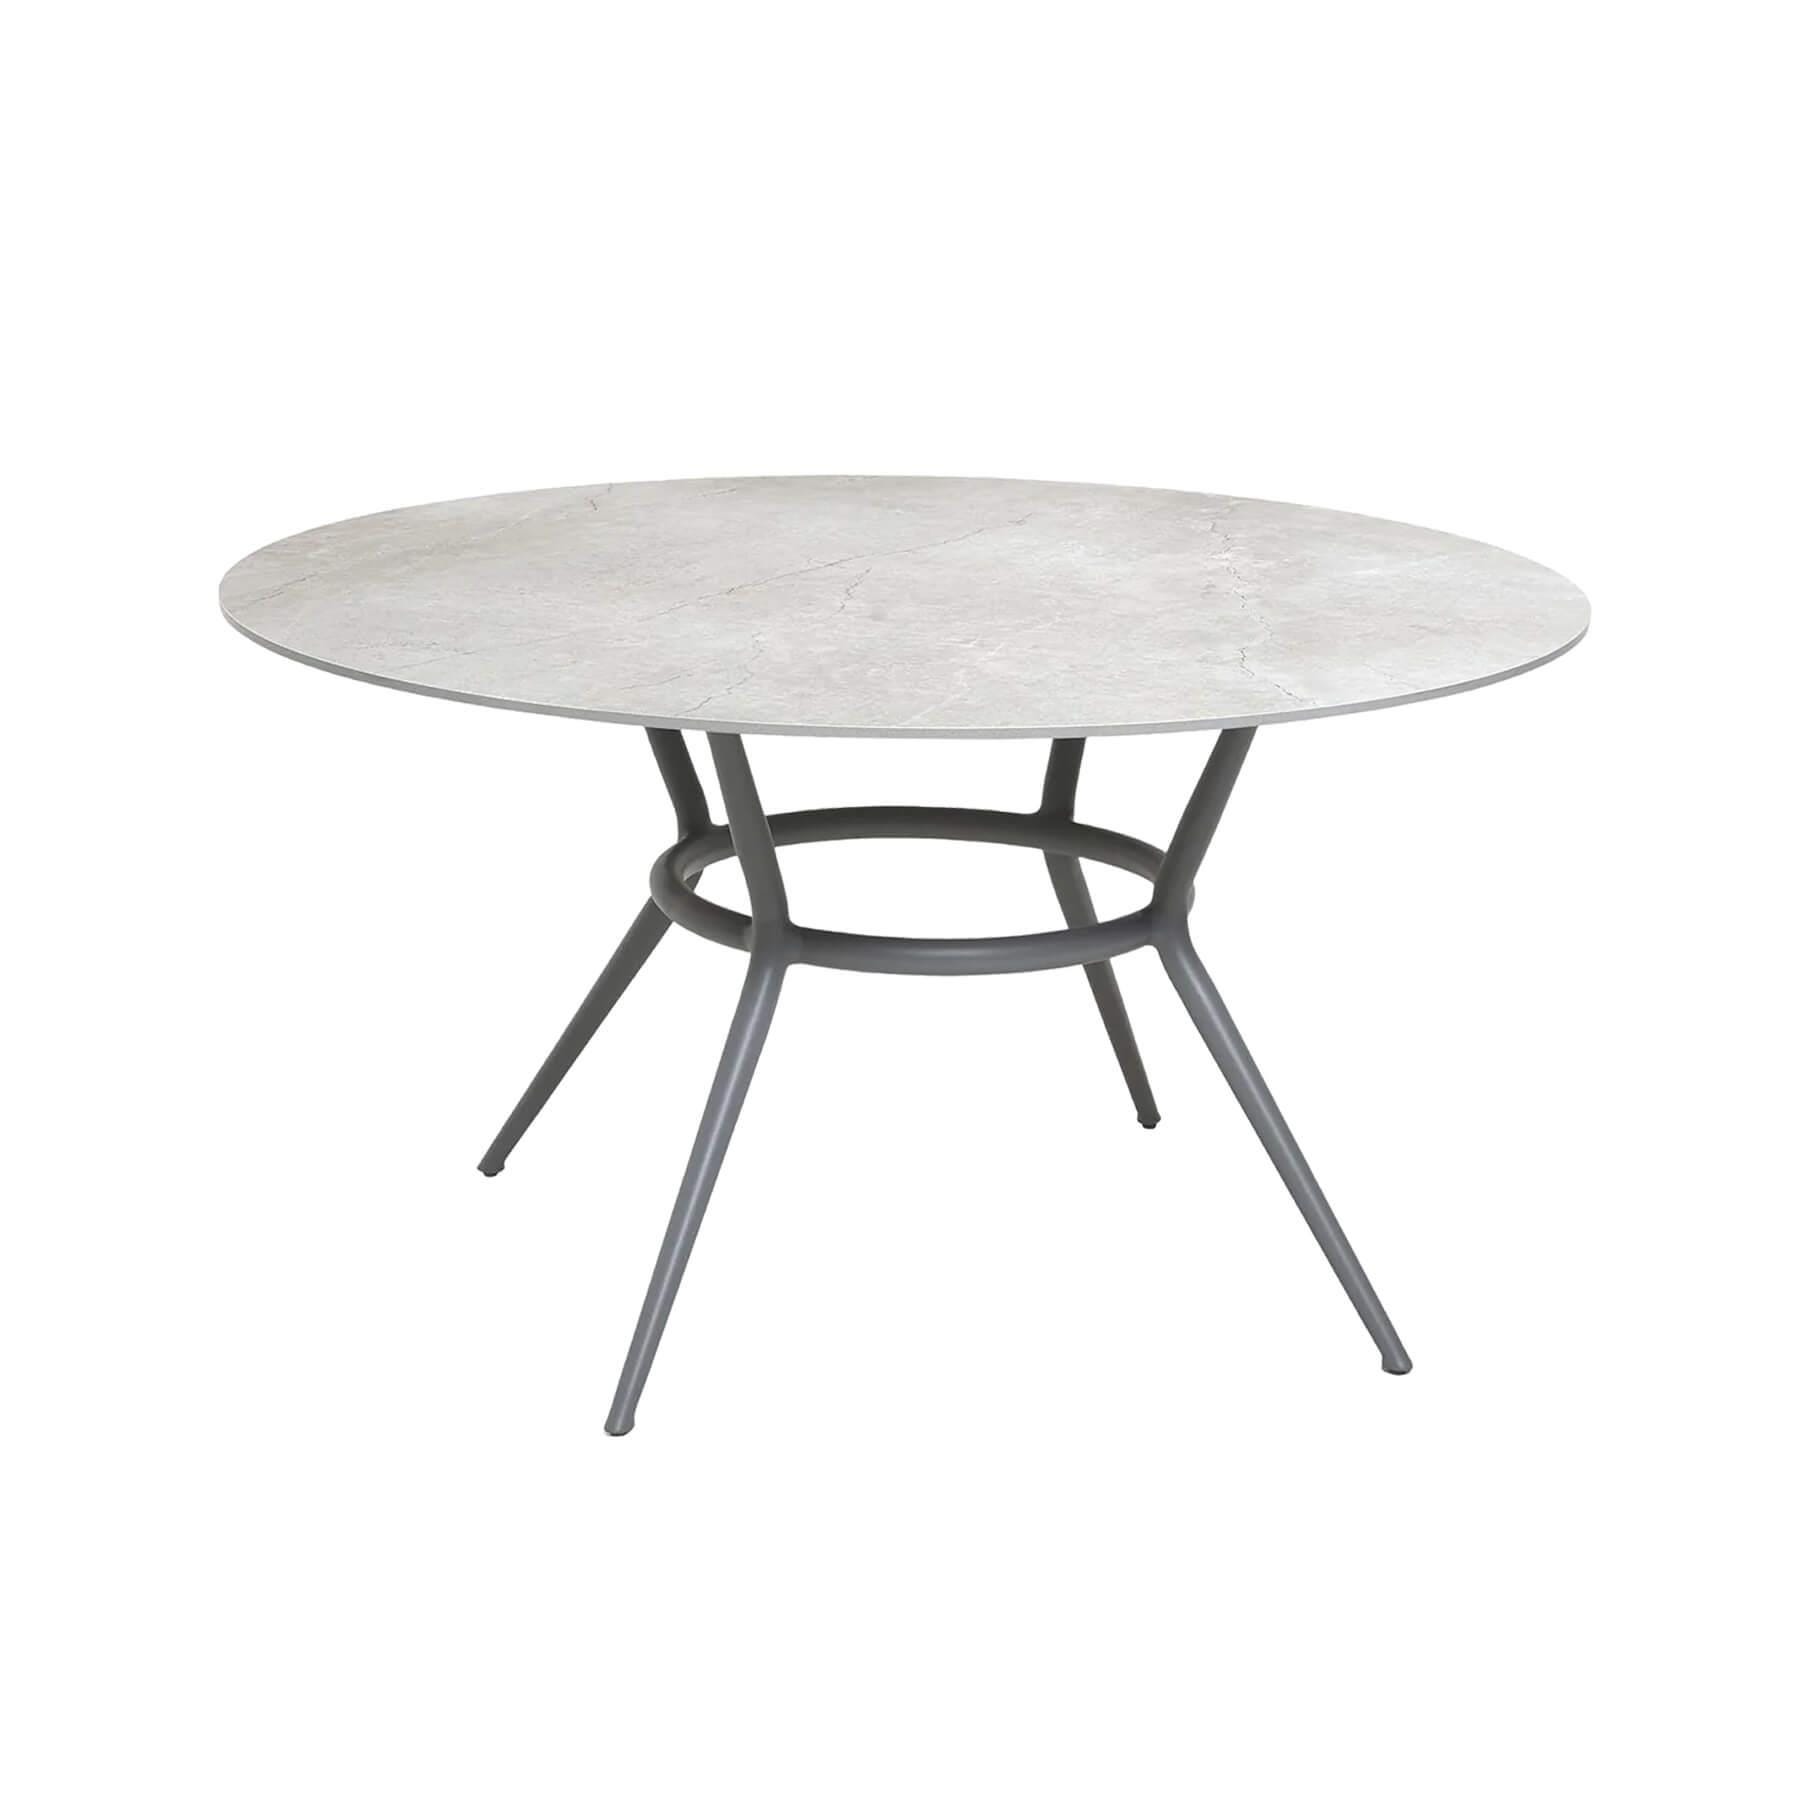 Caneline Joy Outdoor Dining Table Round Ceramic Fossil Grey Top Light Grey Legs